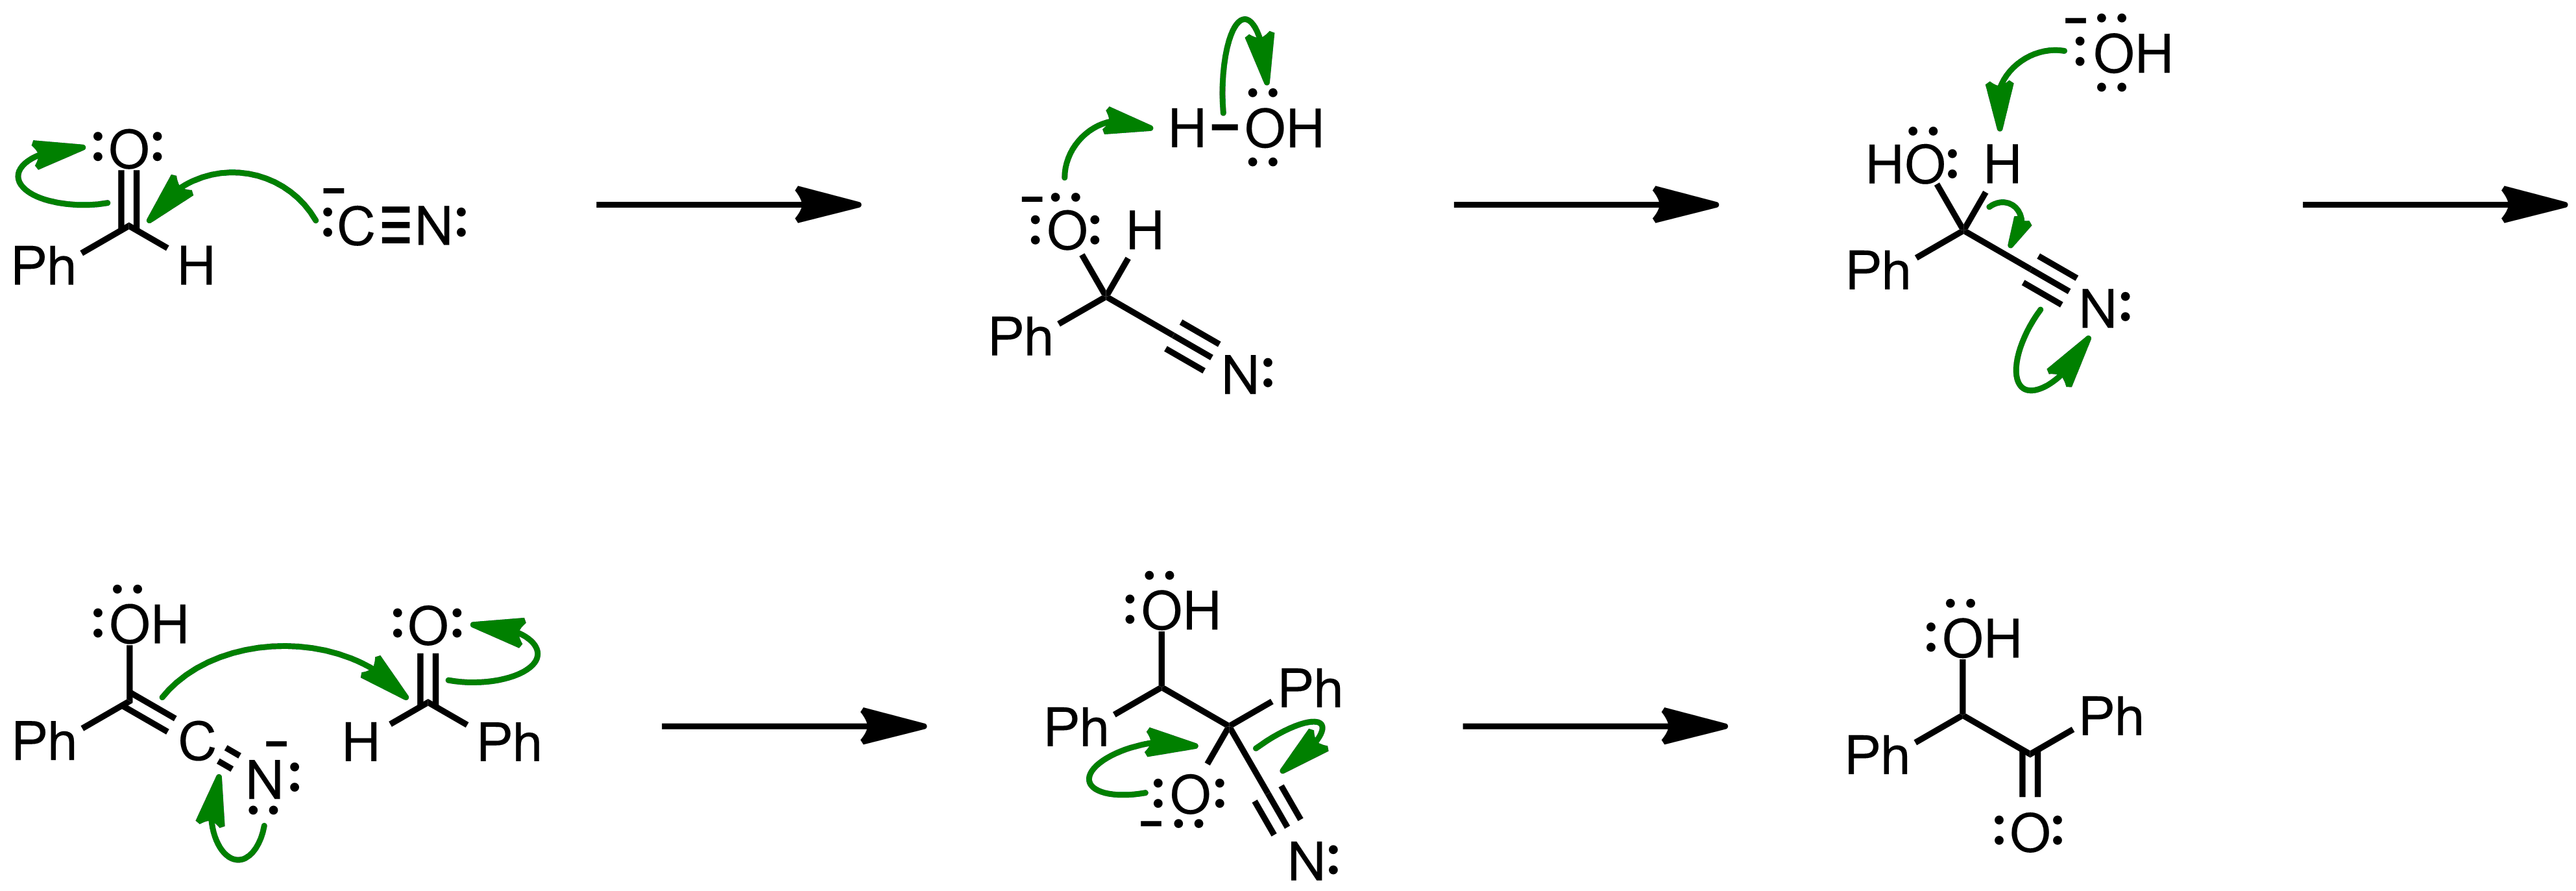 Mechanism of the Benzoin Condensation